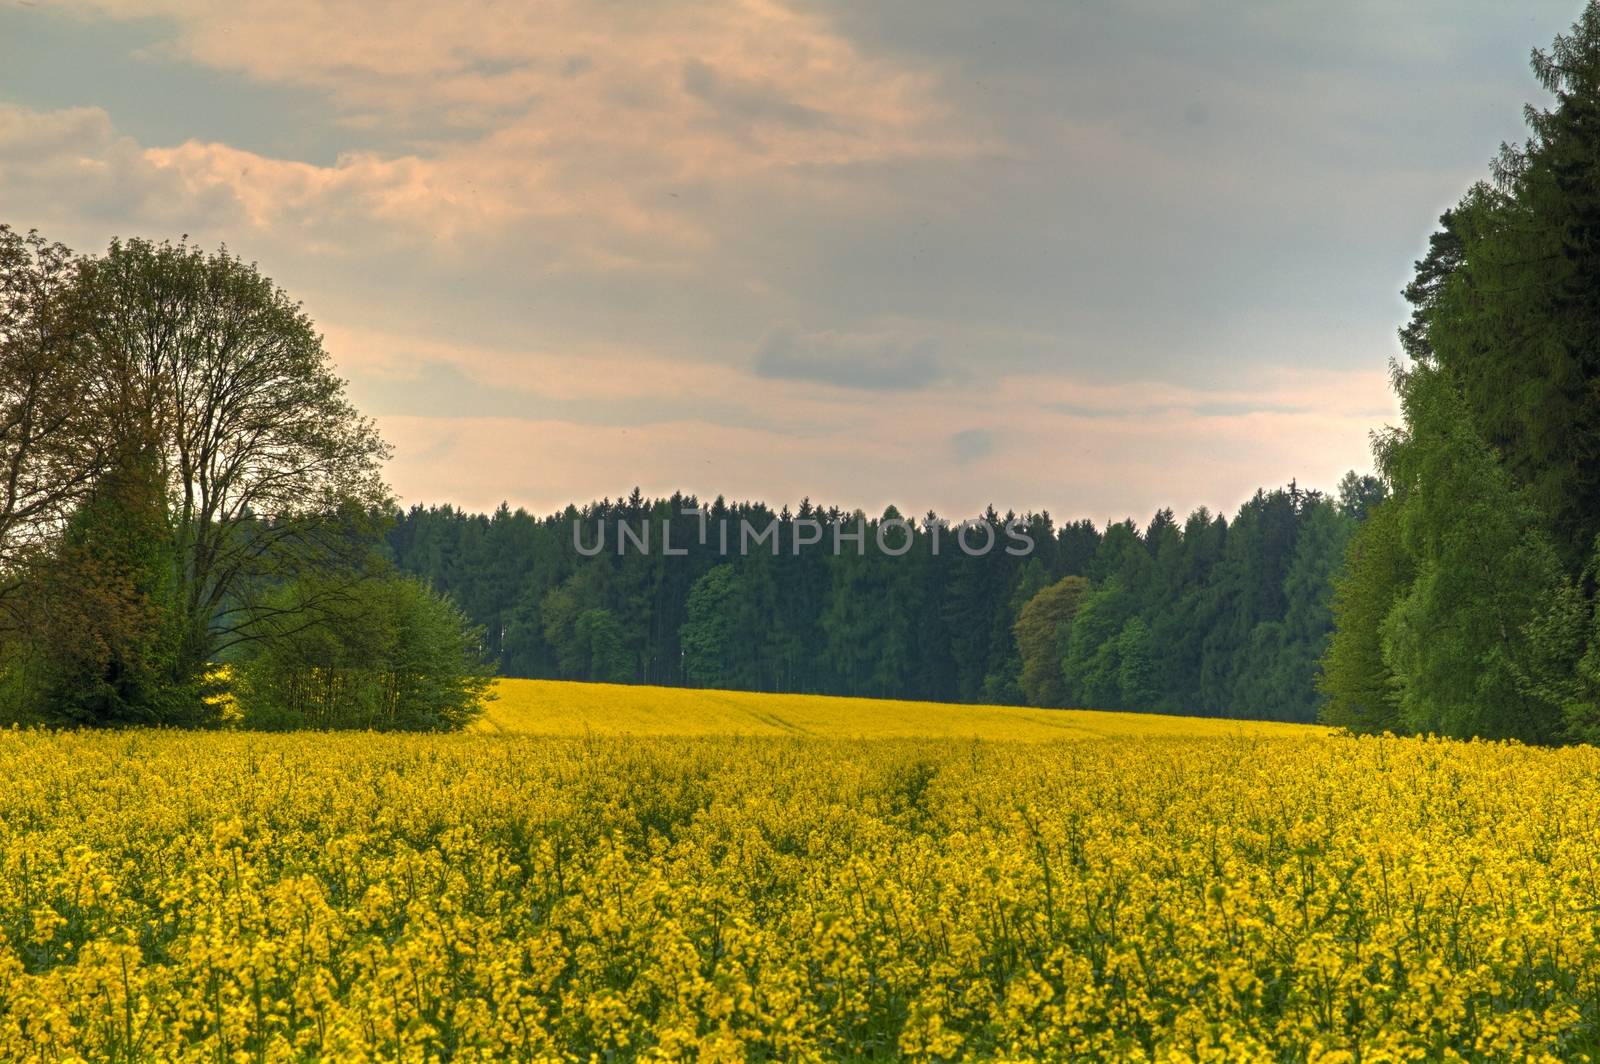 Photo shows yellow field based in the middle of trees.